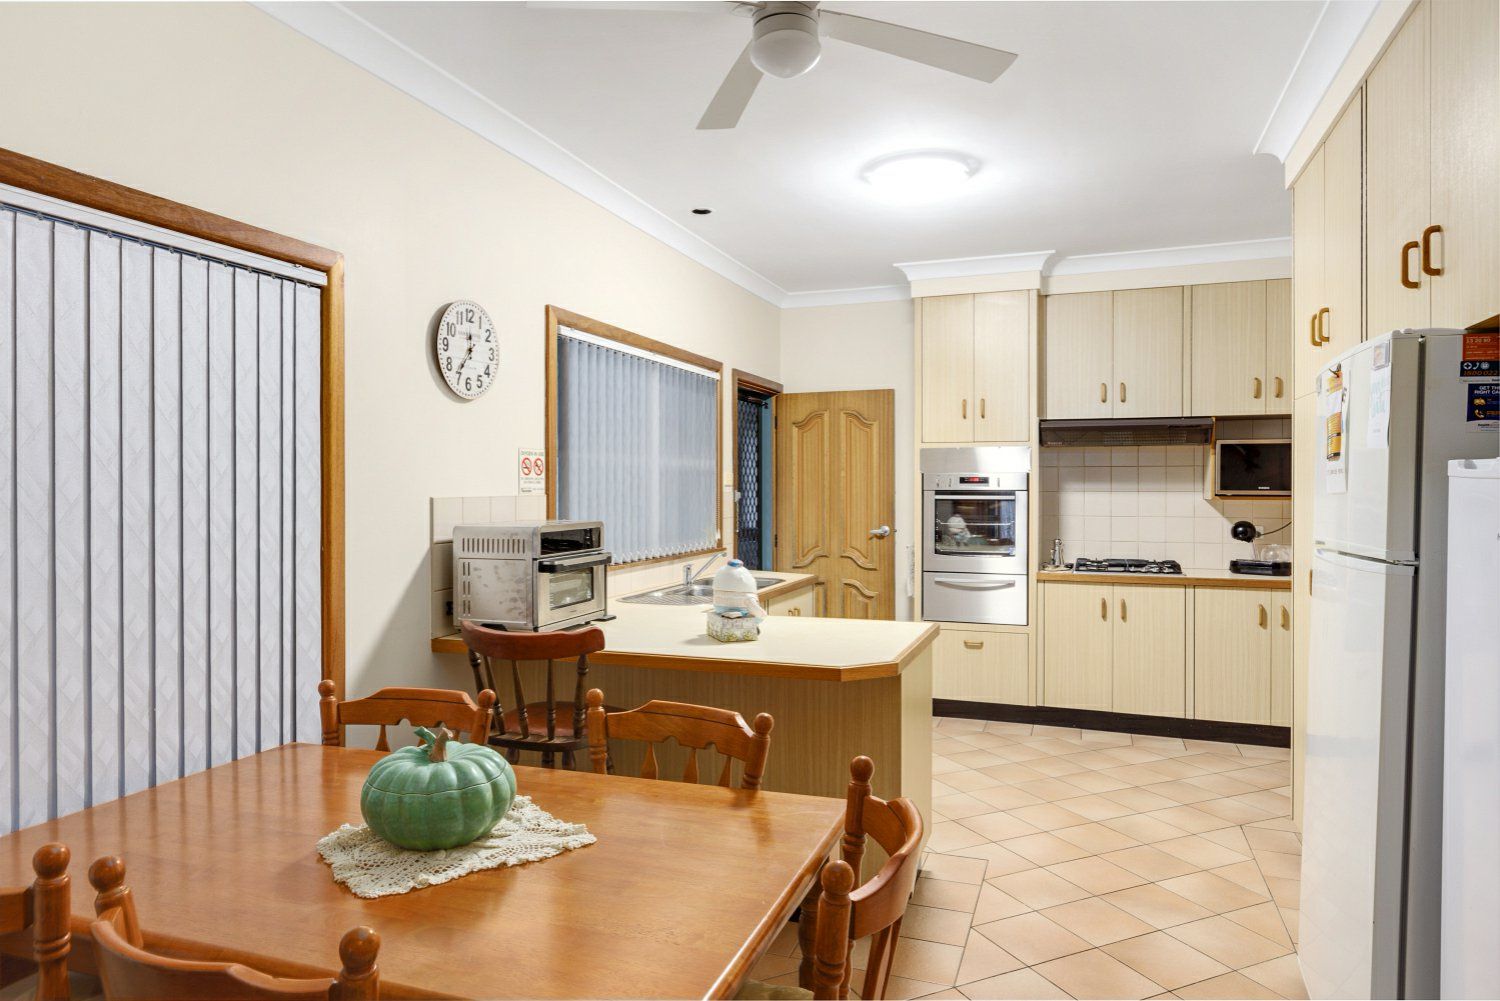 58 Collin Tait Avenue, West Kempsey NSW 2440, Image 2